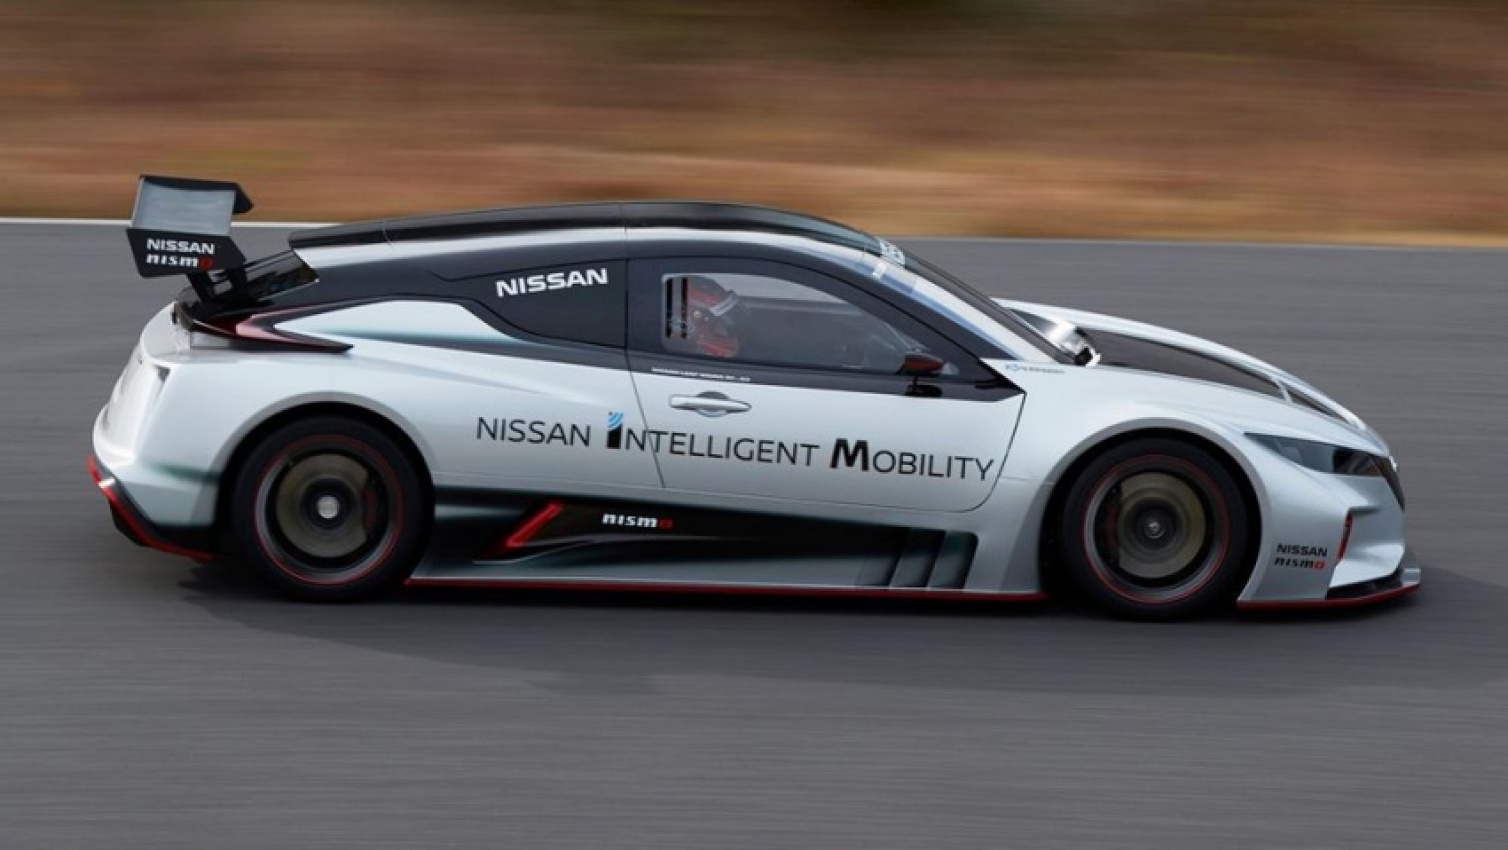 autos, cars, nissan, auto news, leaf, leaf nismo rc, nismo, nissan leaf nismo rc, new nissan leaf nismo rc now with 326 ps, century dash in 3.4 seconds